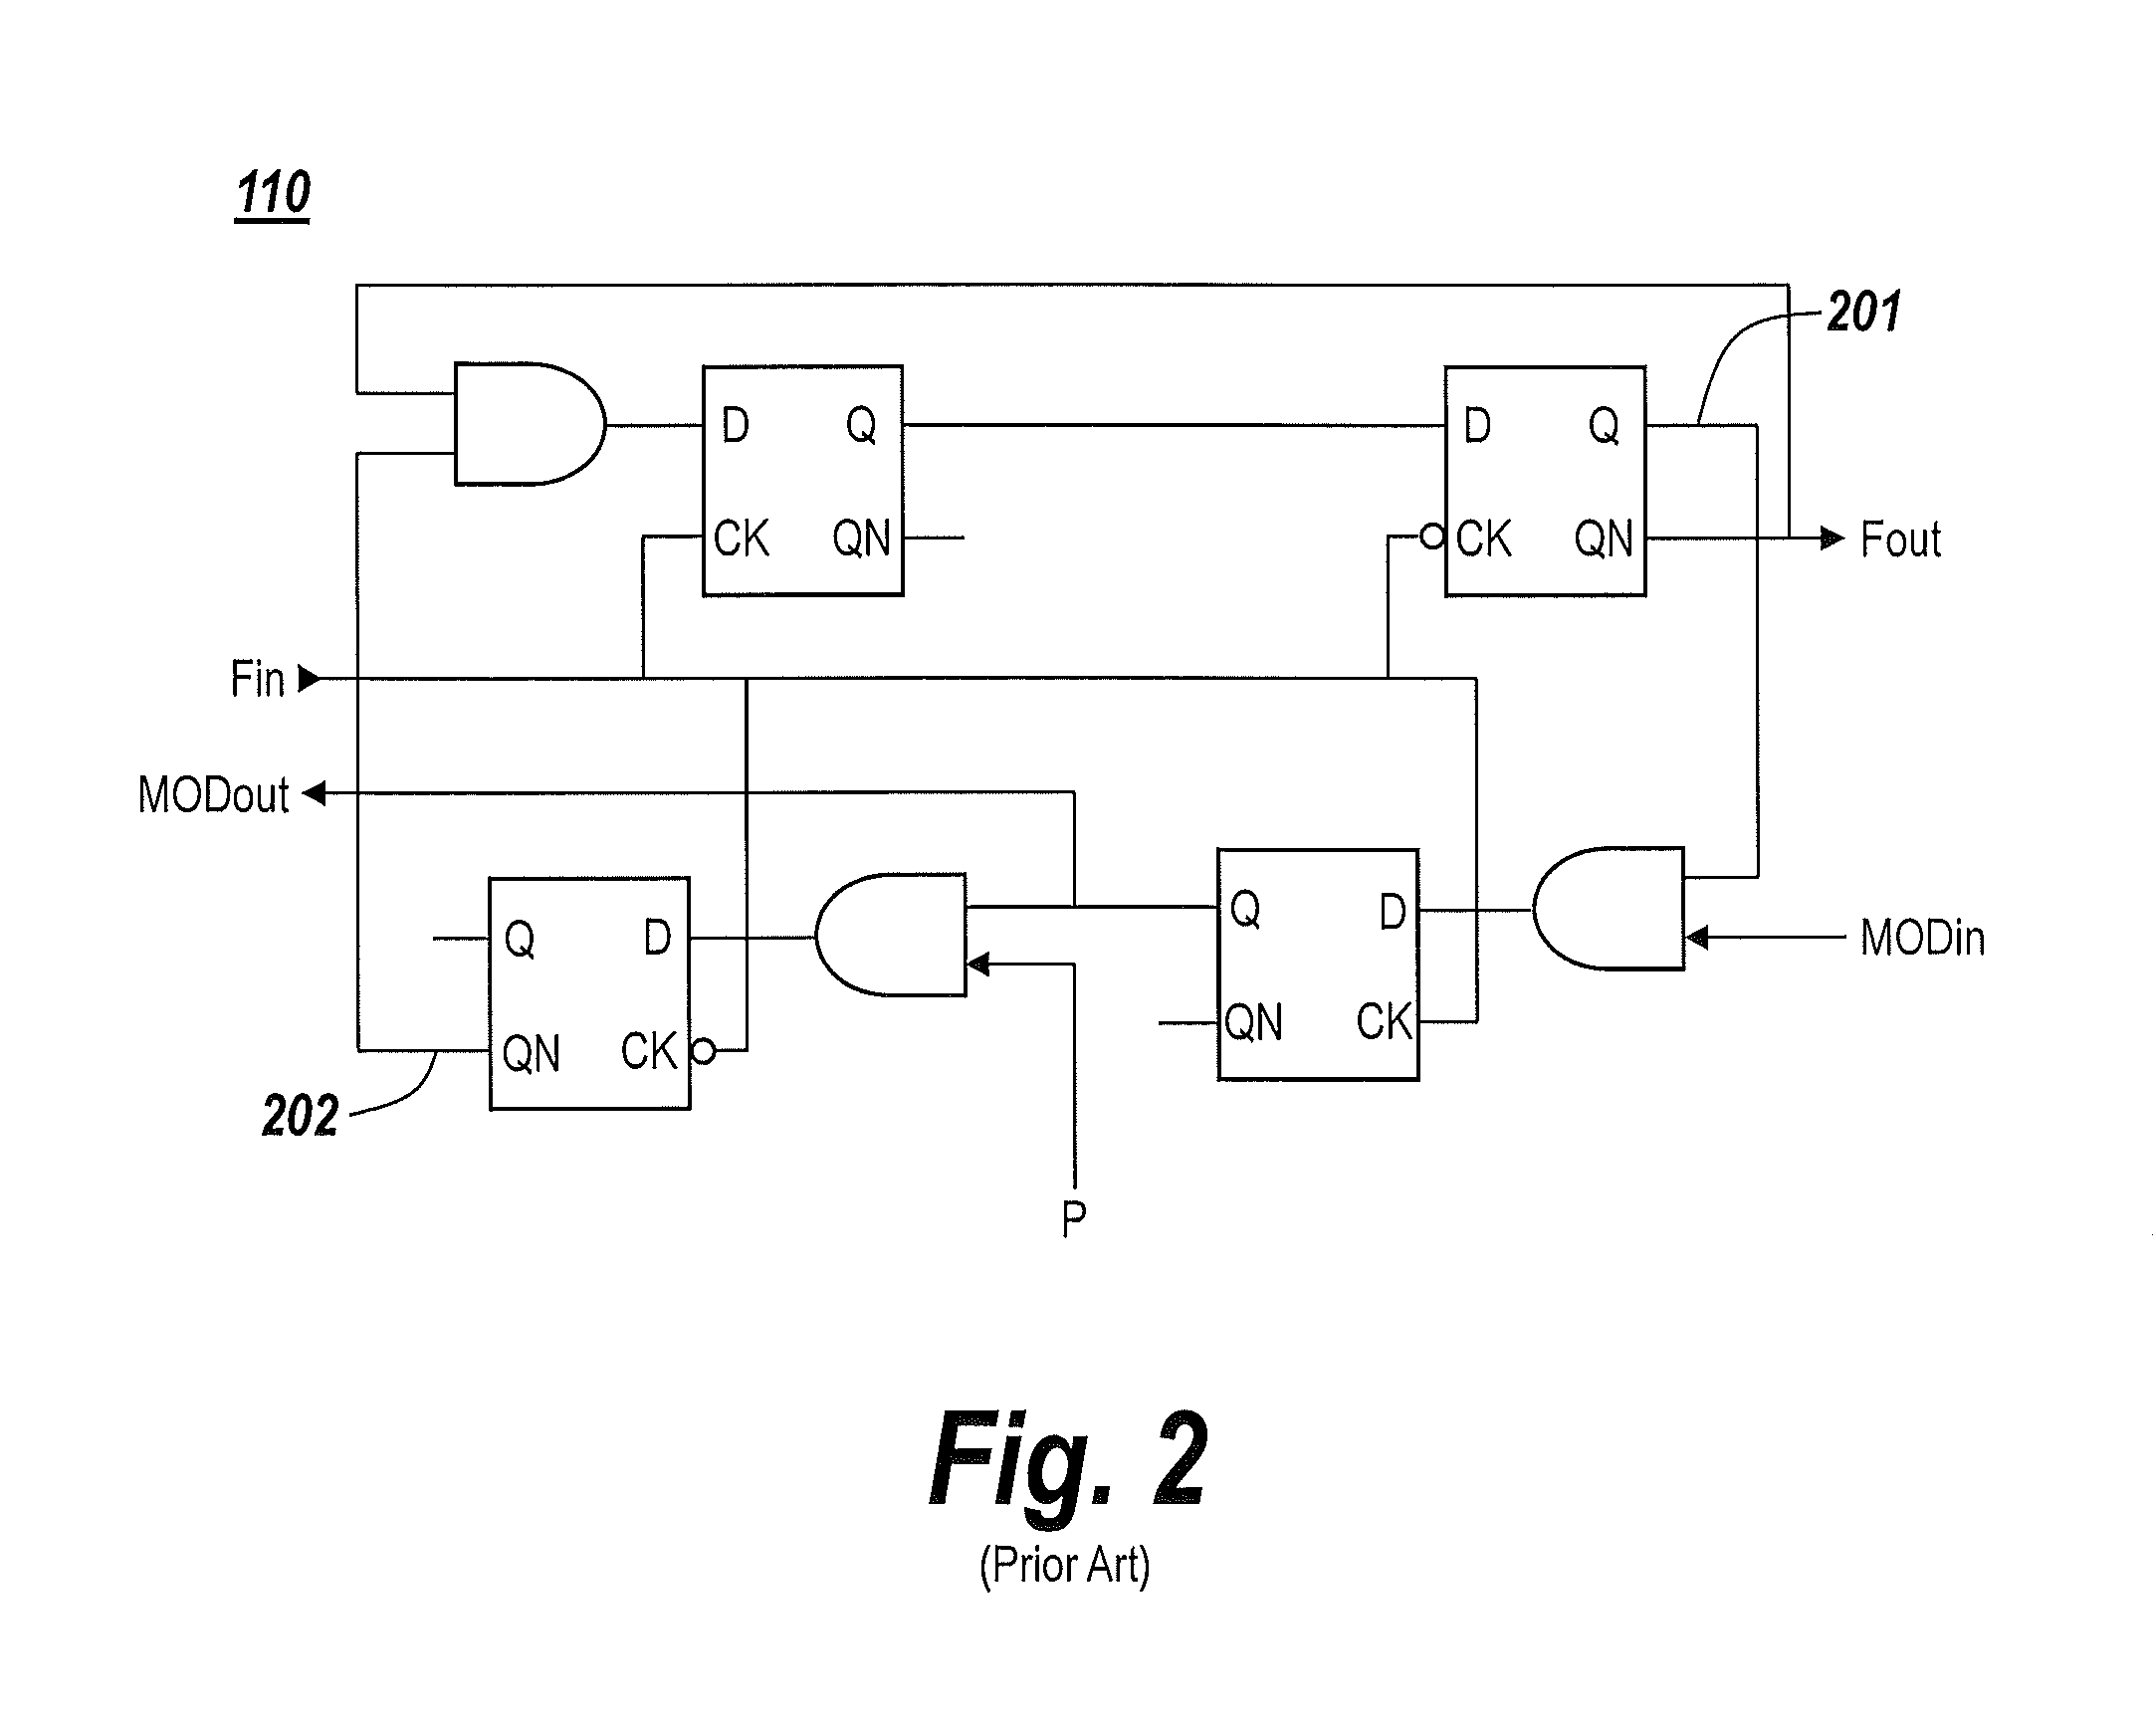 Half-integer frequency dividers that support 50% duty cycle signal generation